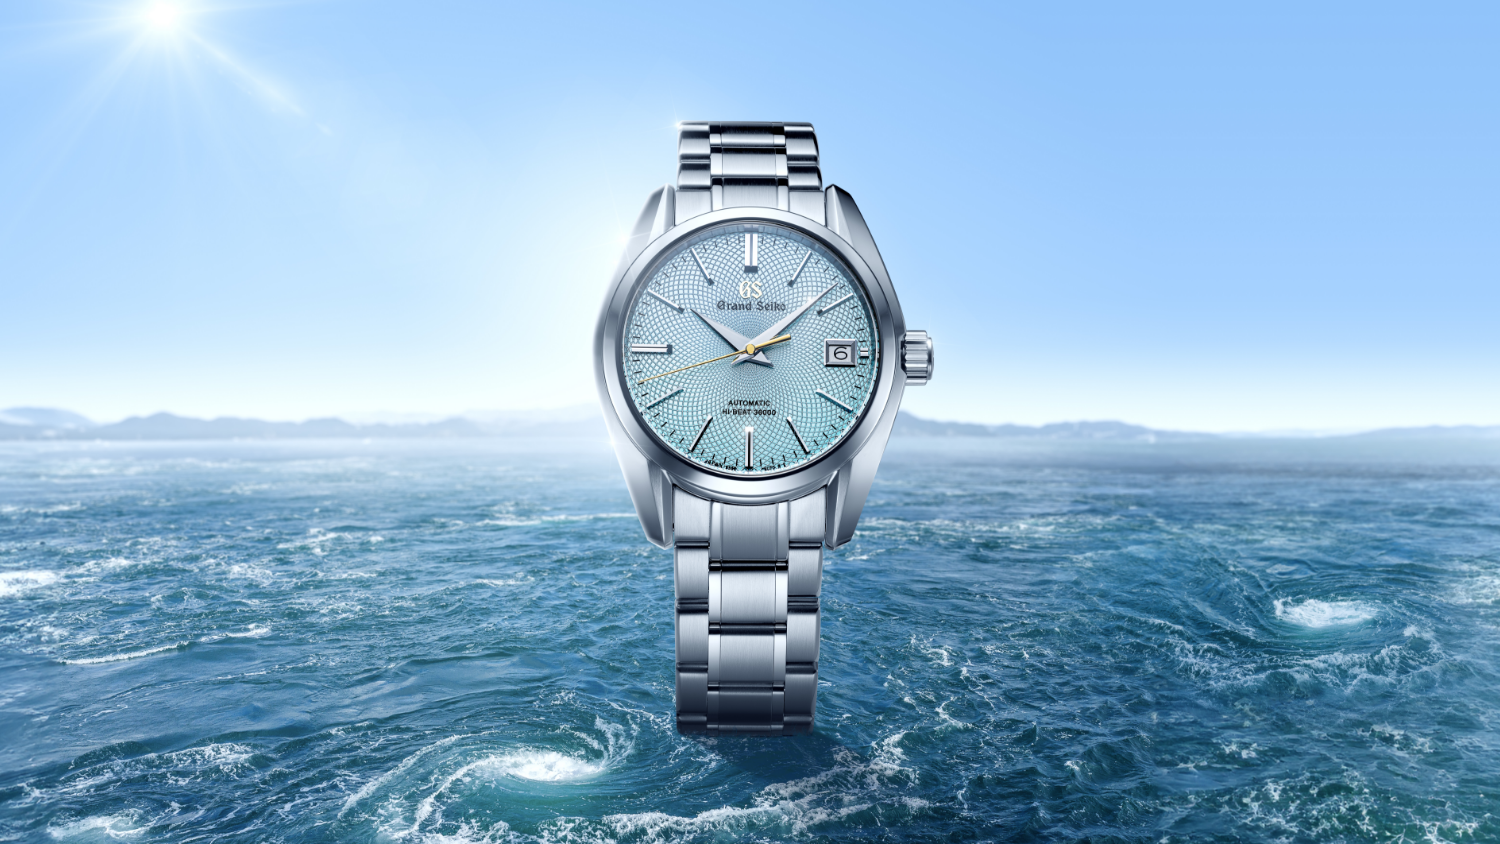 Grand Seiko Launches Oceania Exclusive Edition Introducing the 